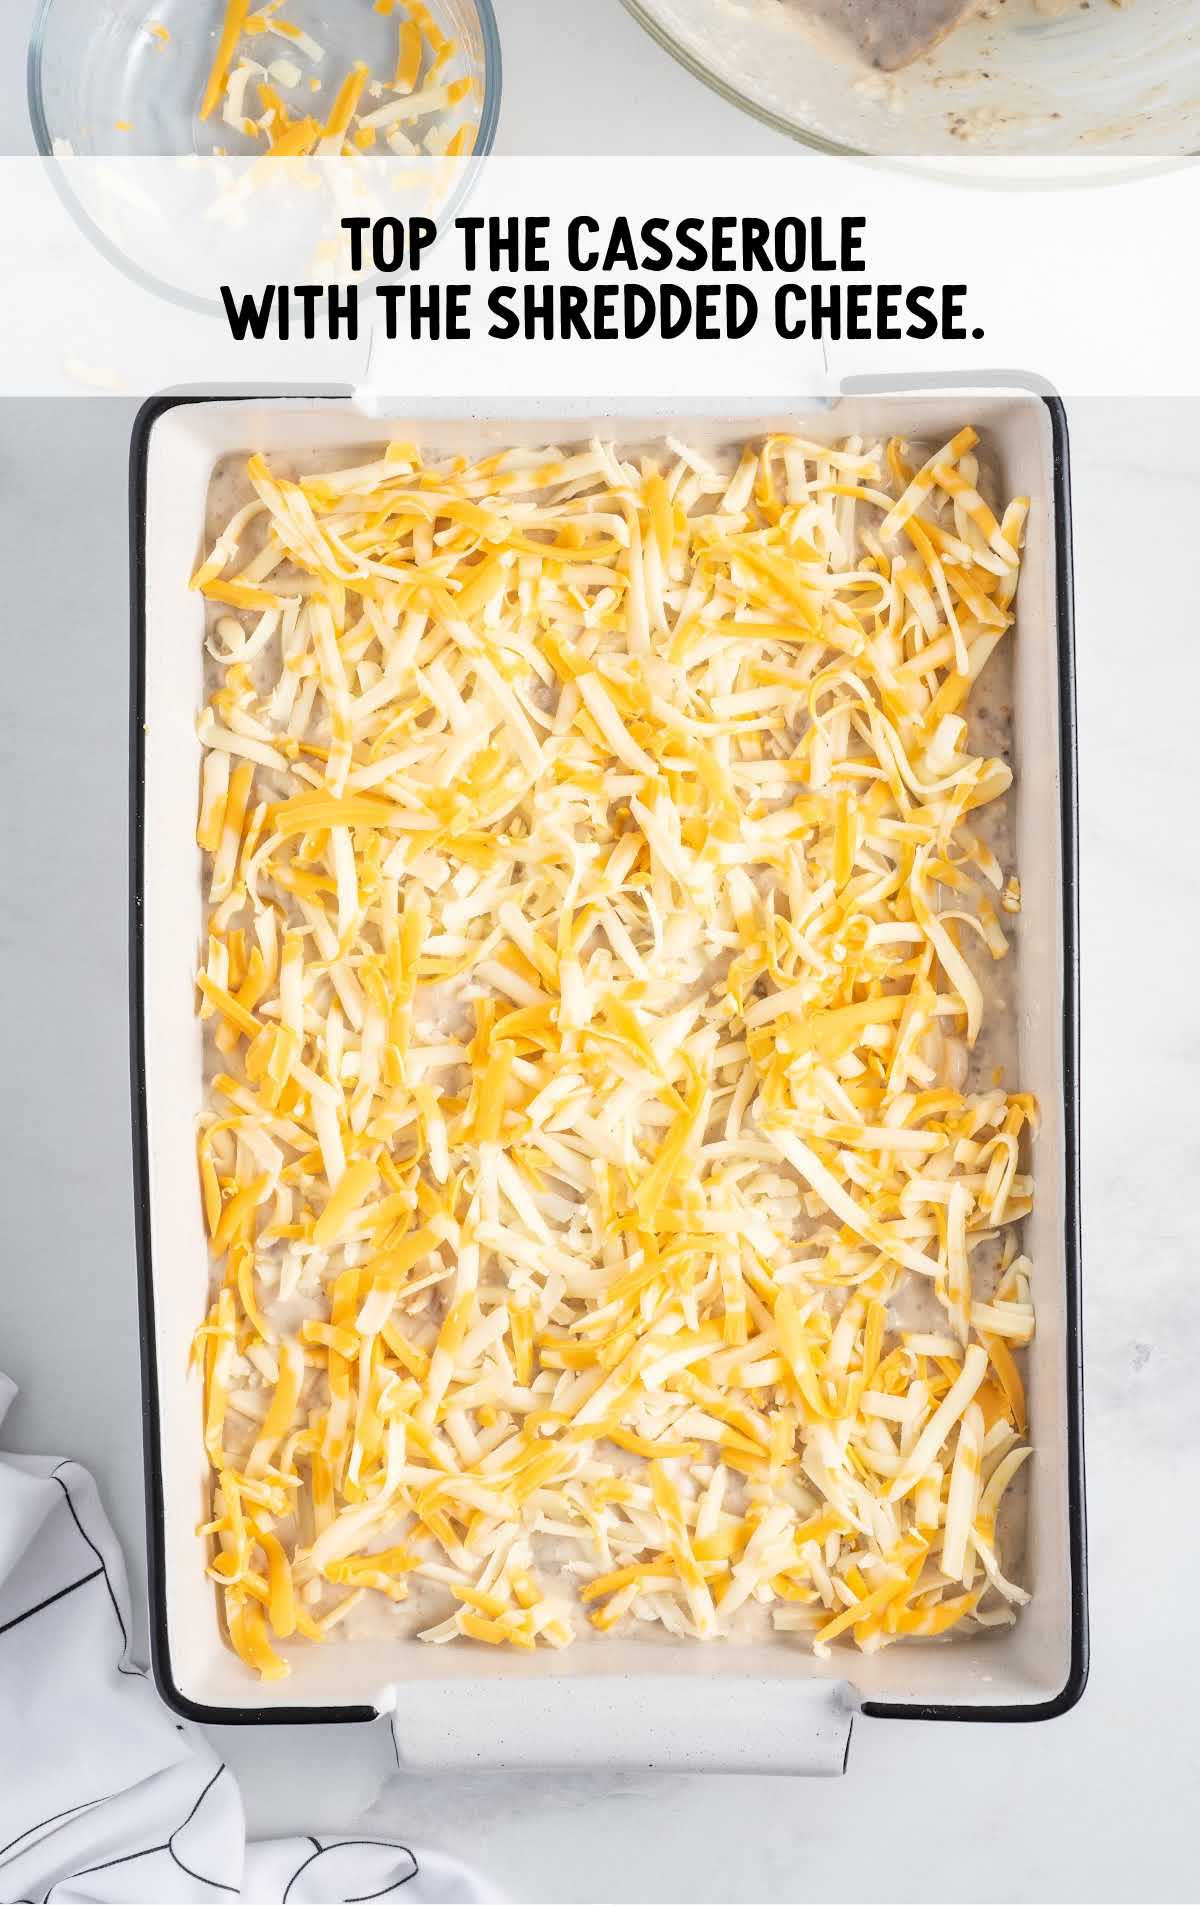 shredded cheese topped on top of the casserole